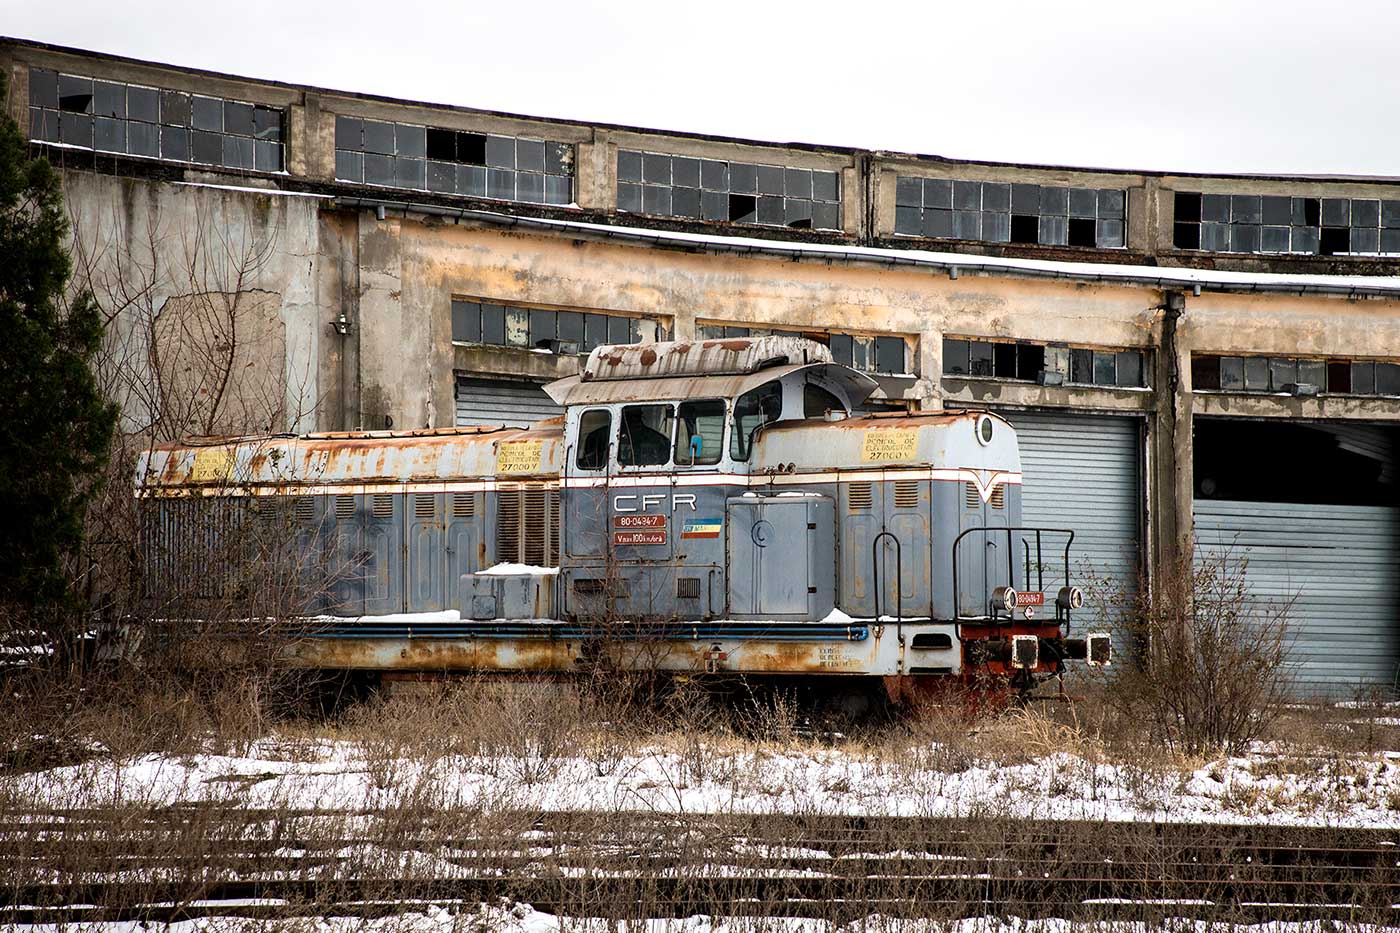 Another obsolete locomotive, this one left rusting beside a railway turntable.